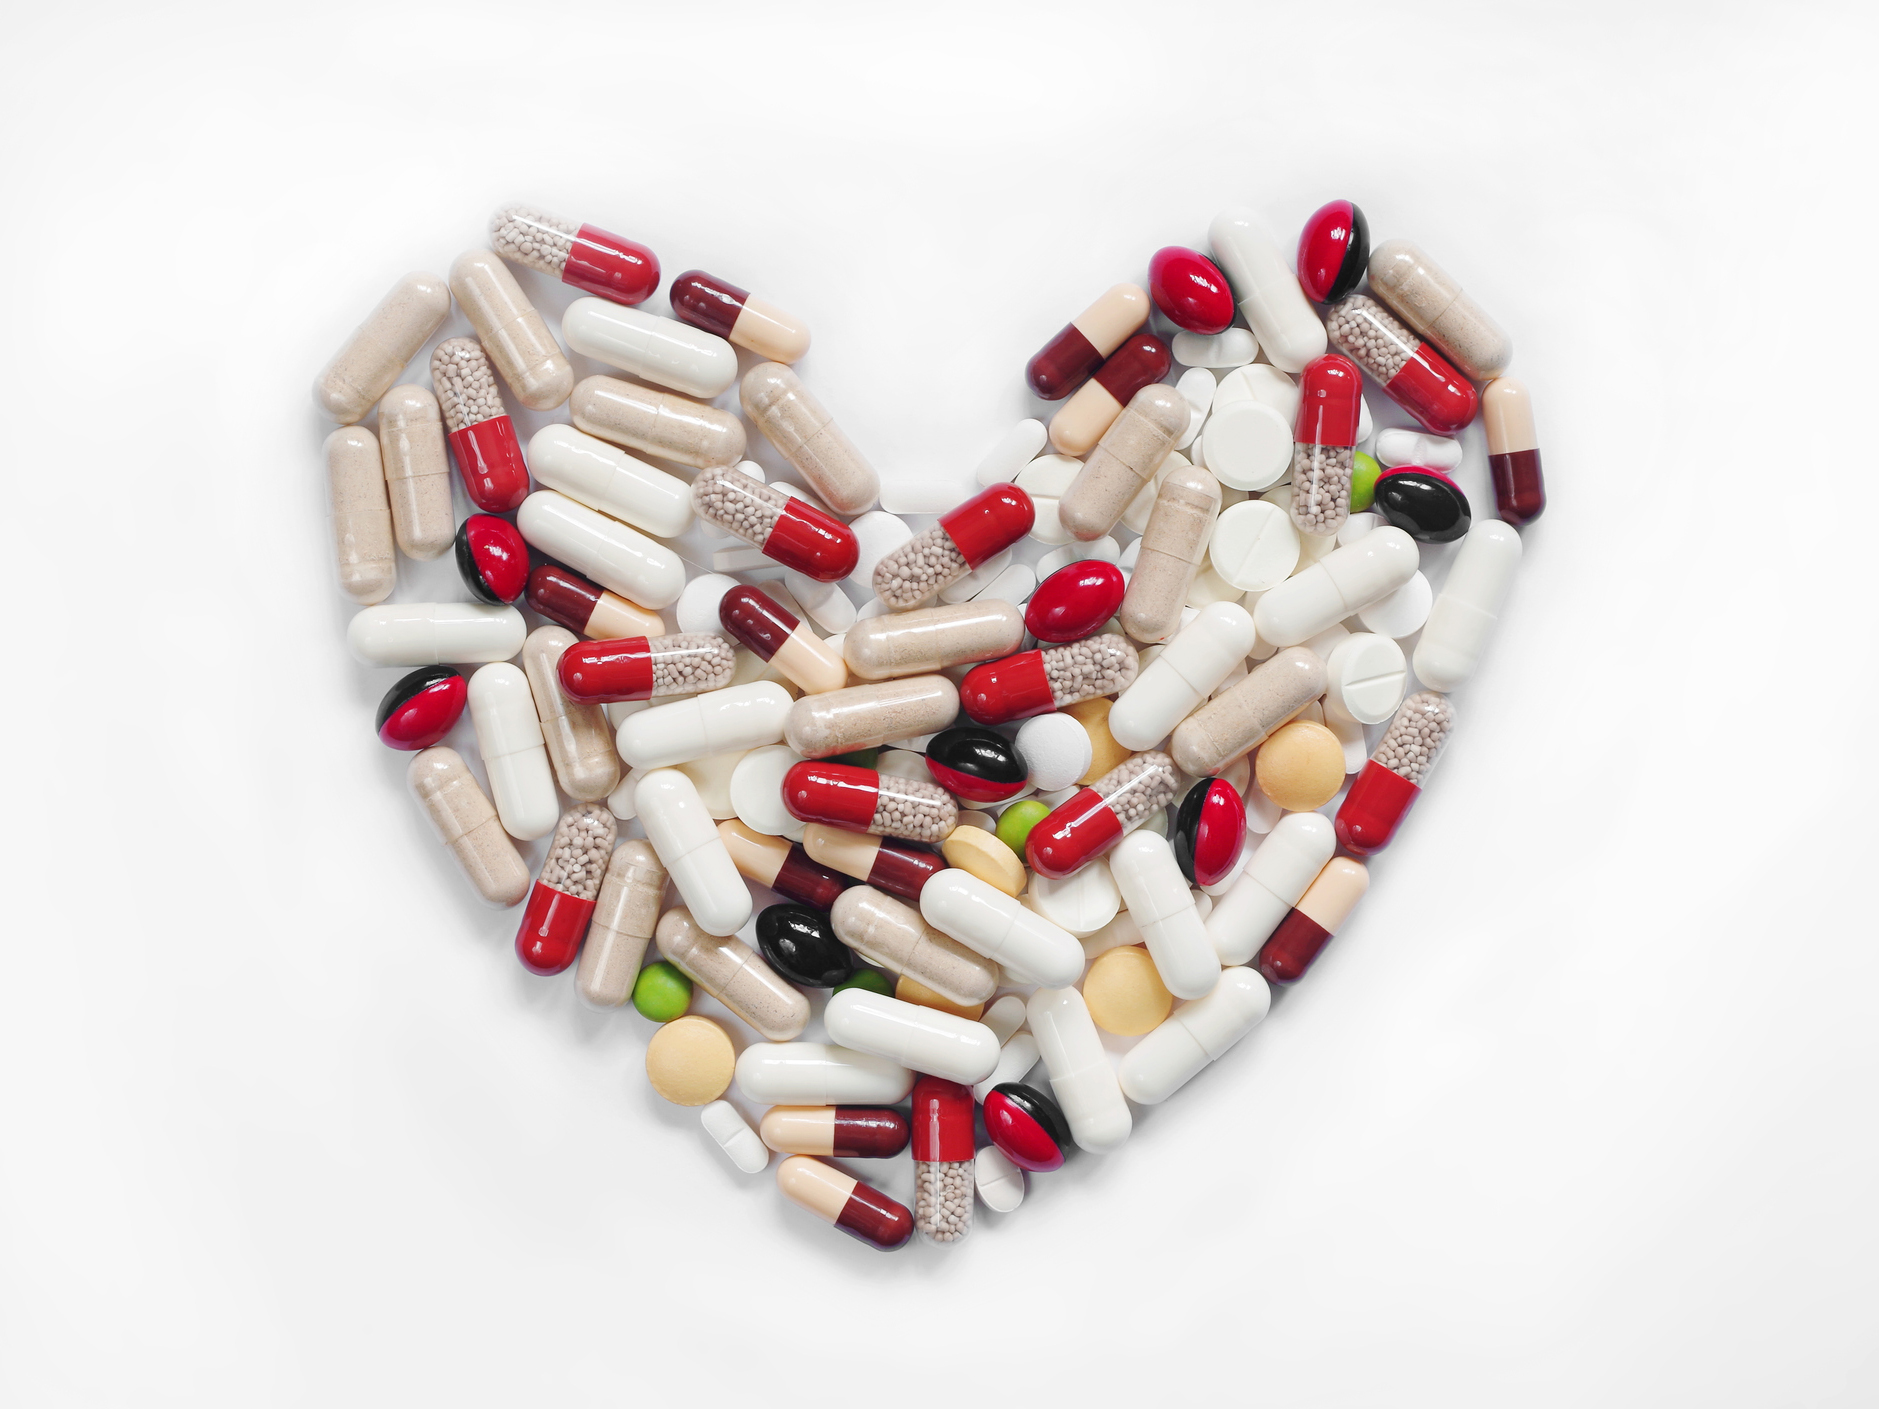 The vitamin deficiency that contributes to heart disease